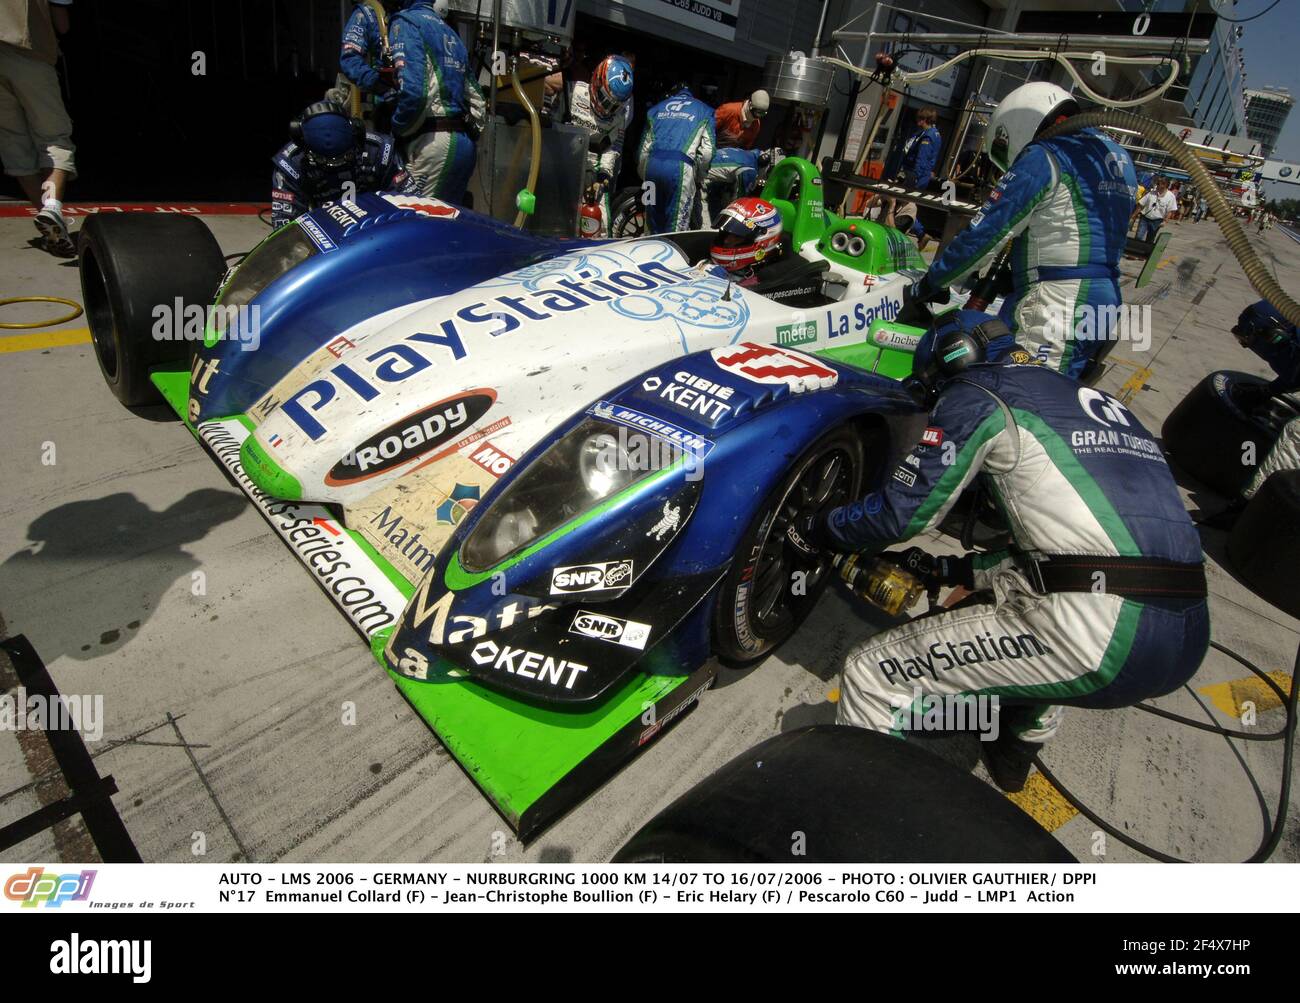 AUTO - LMS 2006 - GERMANY - NURBURGRING 1000 KM 14/07 TO 16/07/2006 - PHOTO : OLIVIER GAUTHIER/ DPPI N°17 Emmanuel Collard (F) - Jean Christophe Boullion (F) - Eric Helary (F) / Pescarolo C60 - Judd - LMP1 Action PIT STOP PITSTOP Stock Photo